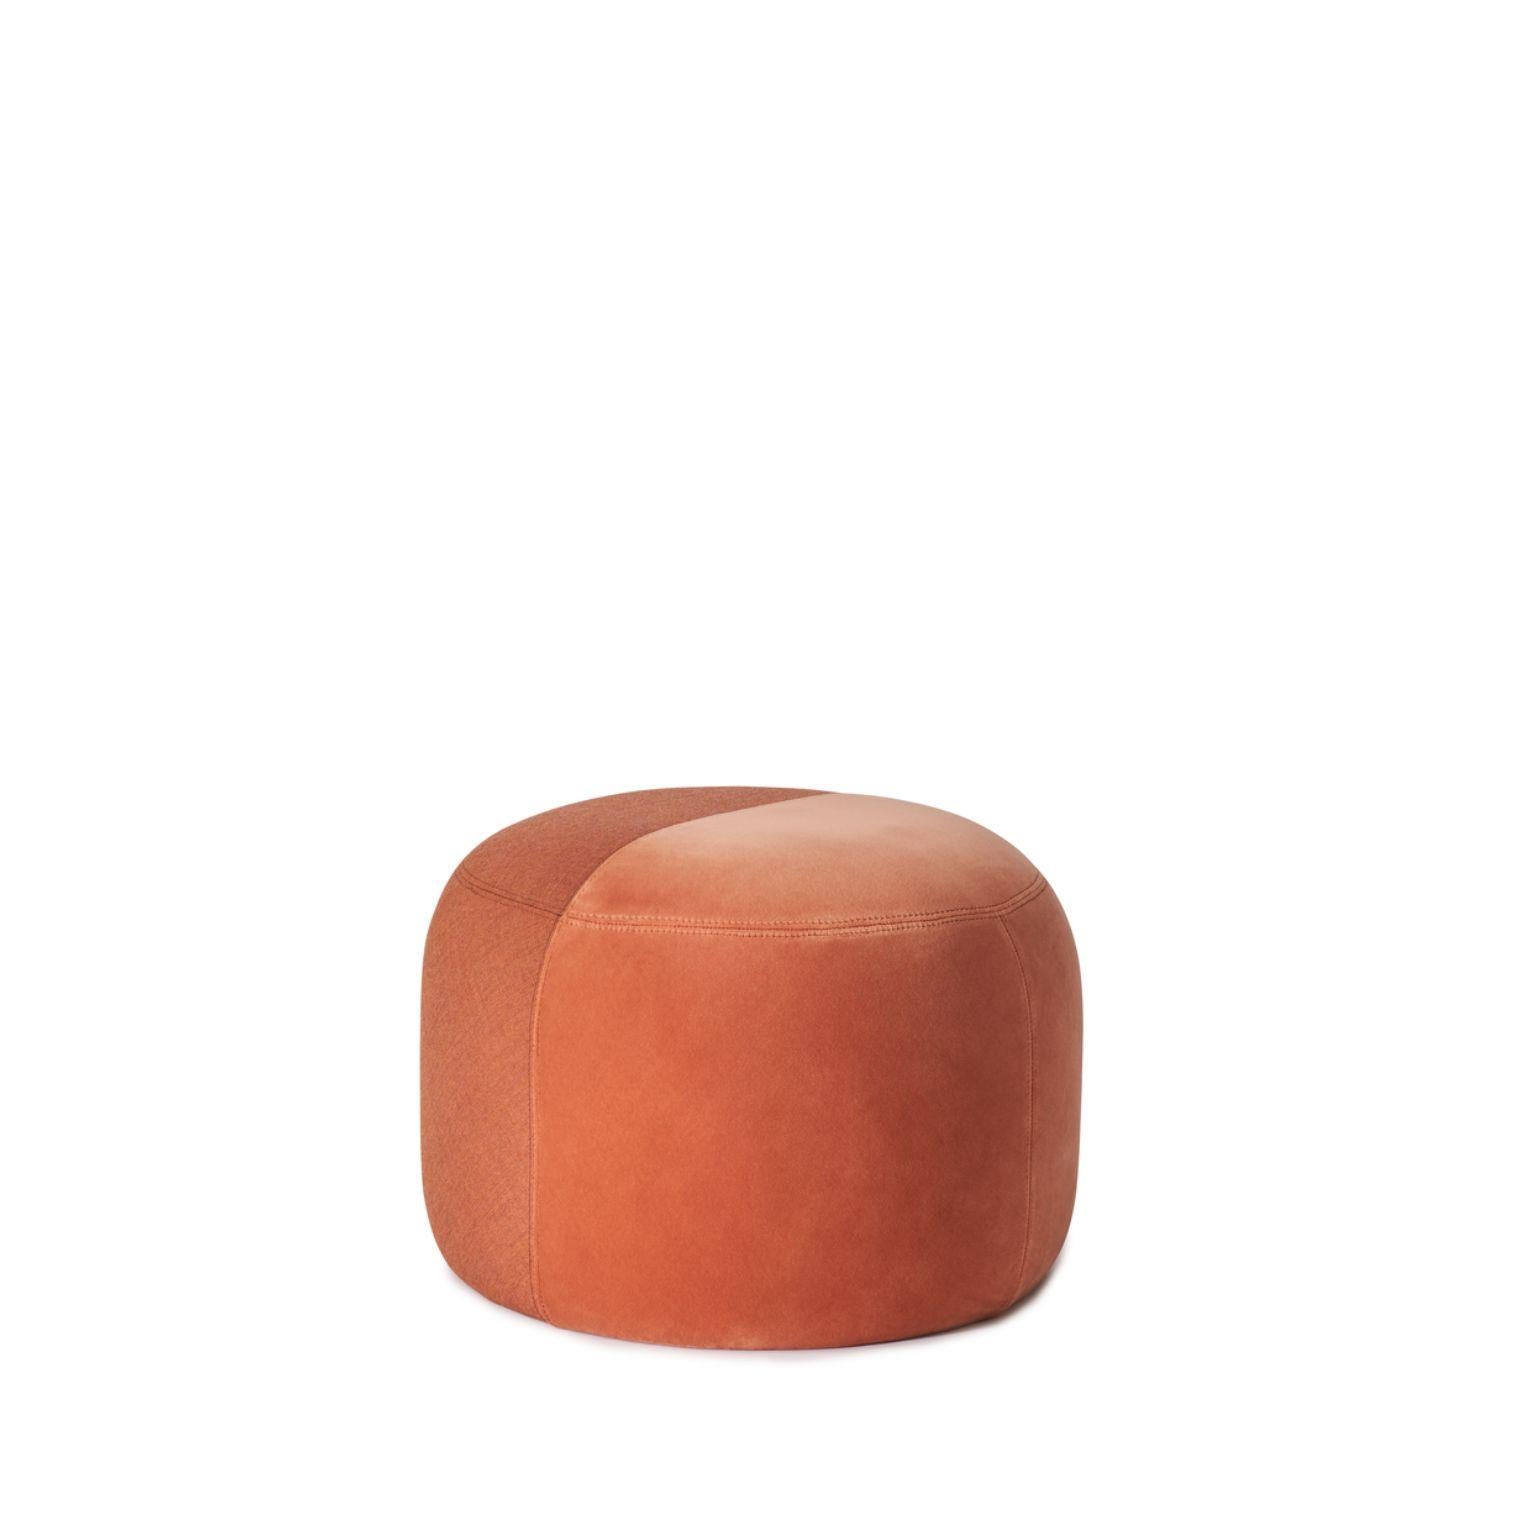 Dainty Pouf Burnt Orange Rusty Rose by Warm Nordic
Dimensions: D55 x H 39 cm
Material: Textile upholstery, Wooden frame, foam.
Weight: 9.5 kg
Also available in different colours and finishes. Please contact us.

Sophisticated, two-coloured pouf with